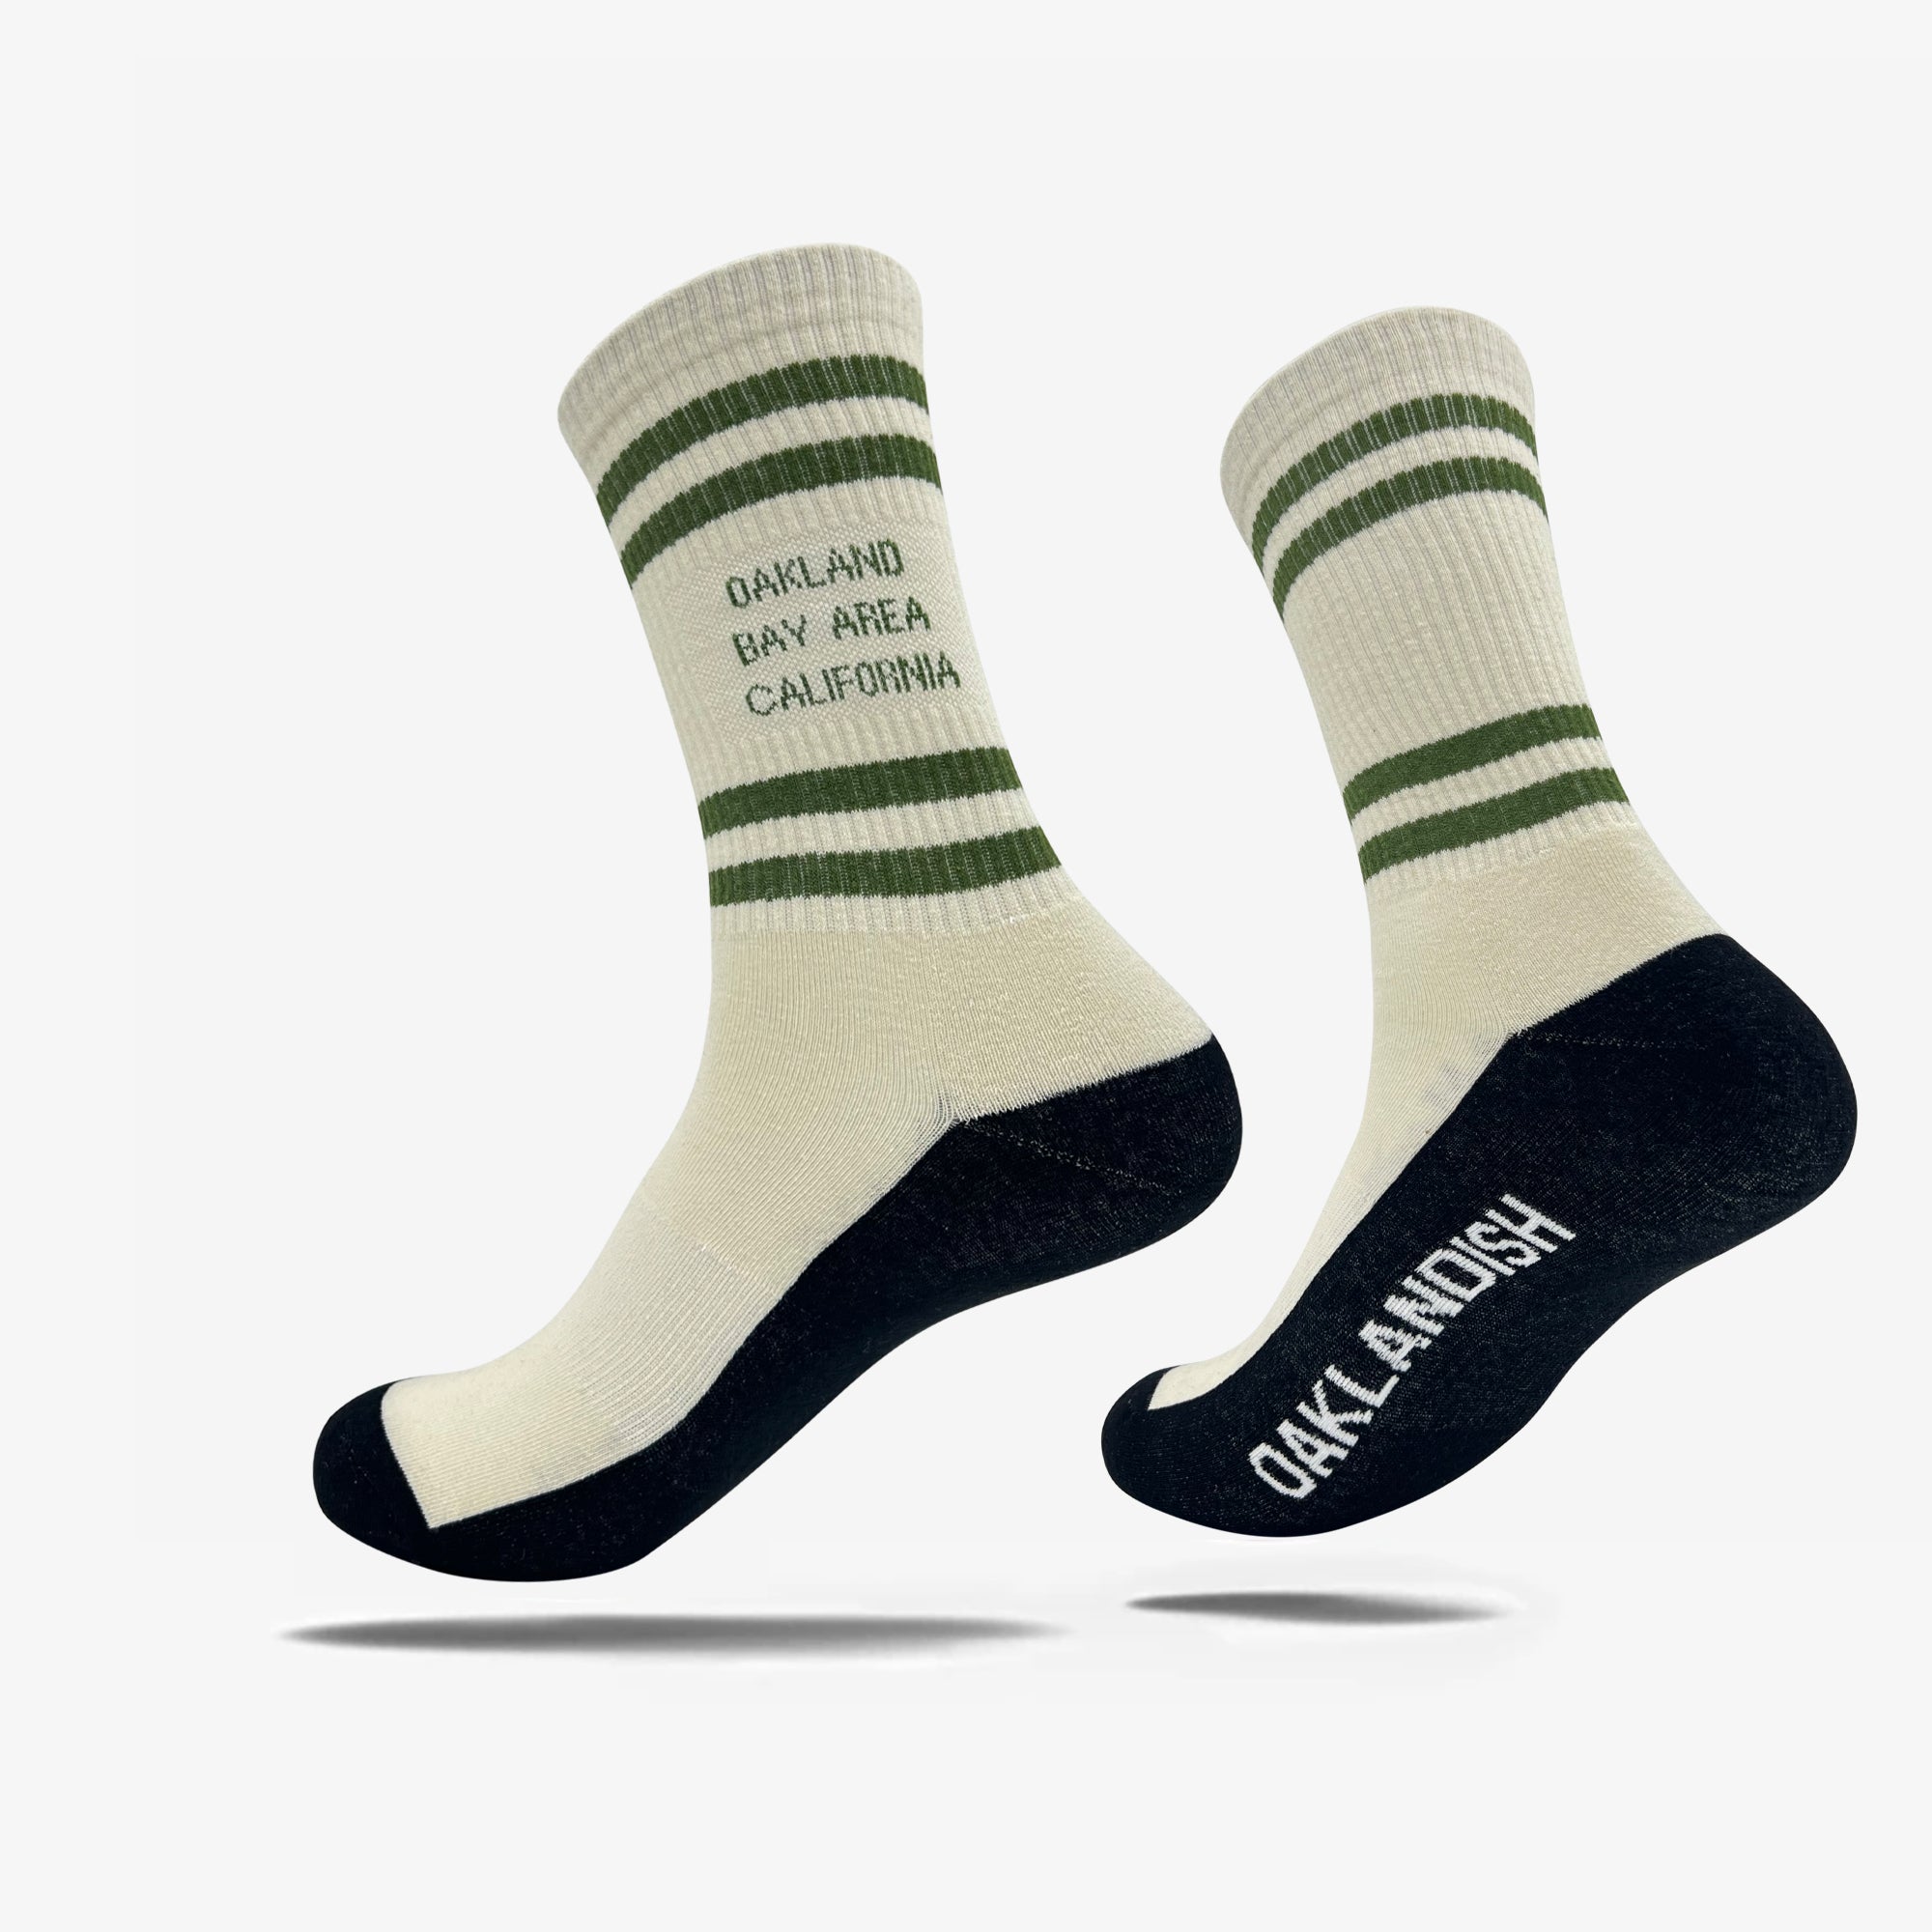 hite socks with Oakland Bay Area California in capital letters with 4 green stripes. Oaklandish wordmark is visible on one black sole.